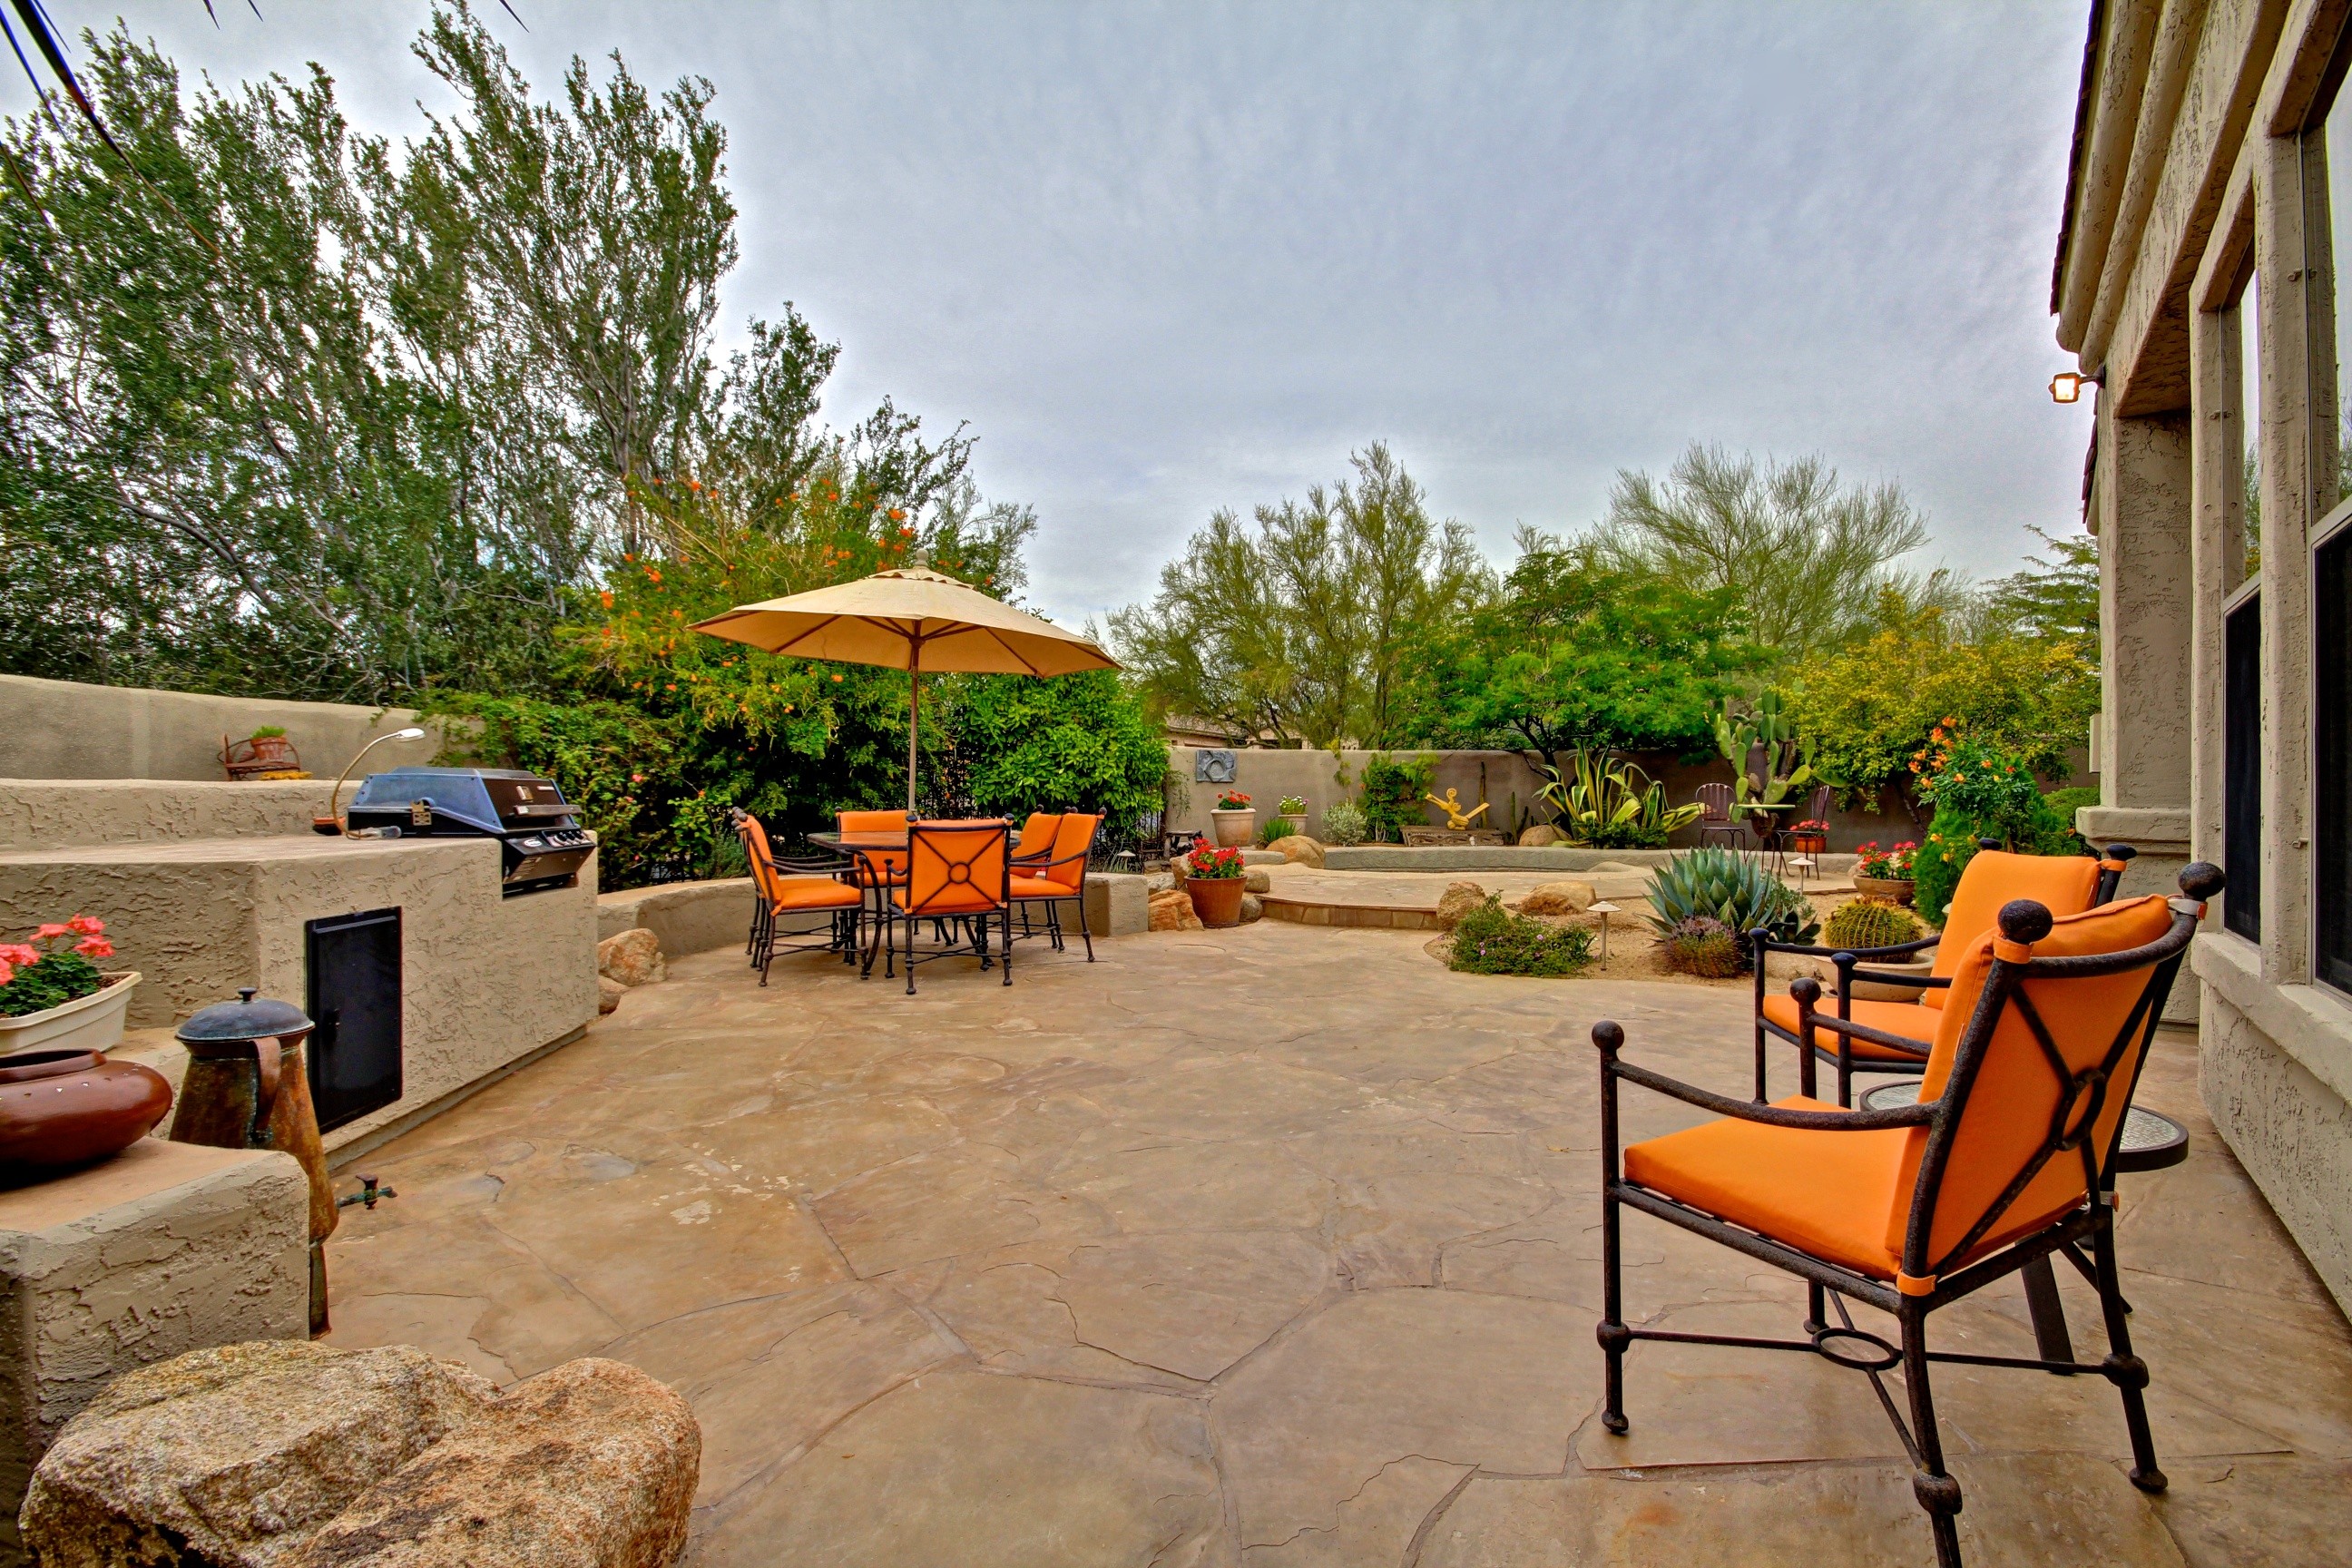 Plenty of outdoor living space at this Scottsdale home for sale in DC Ranch located at 20534 N 95th St Scottsdale, AZ 85255 listed by Don Matheson at The Matheson Team